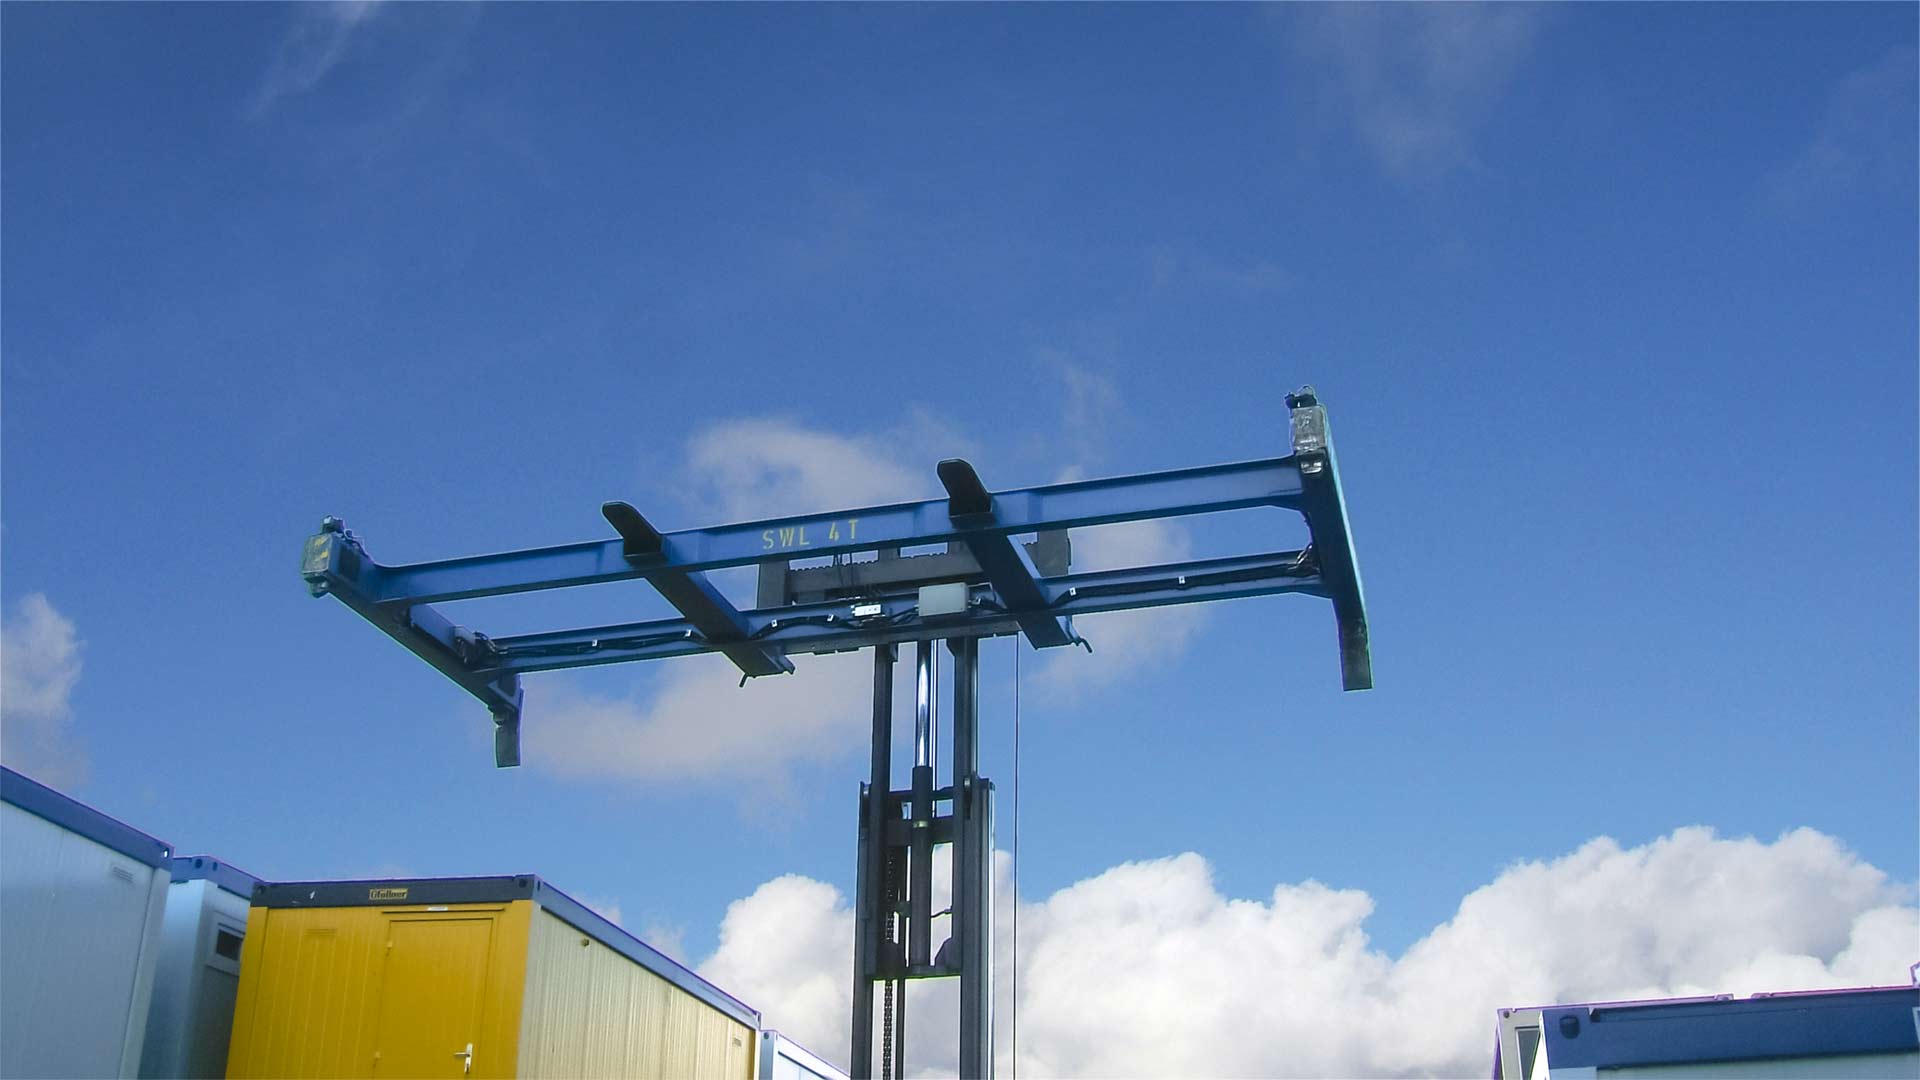 A blue container spreader mounted on a forklift truck is extended far upwards